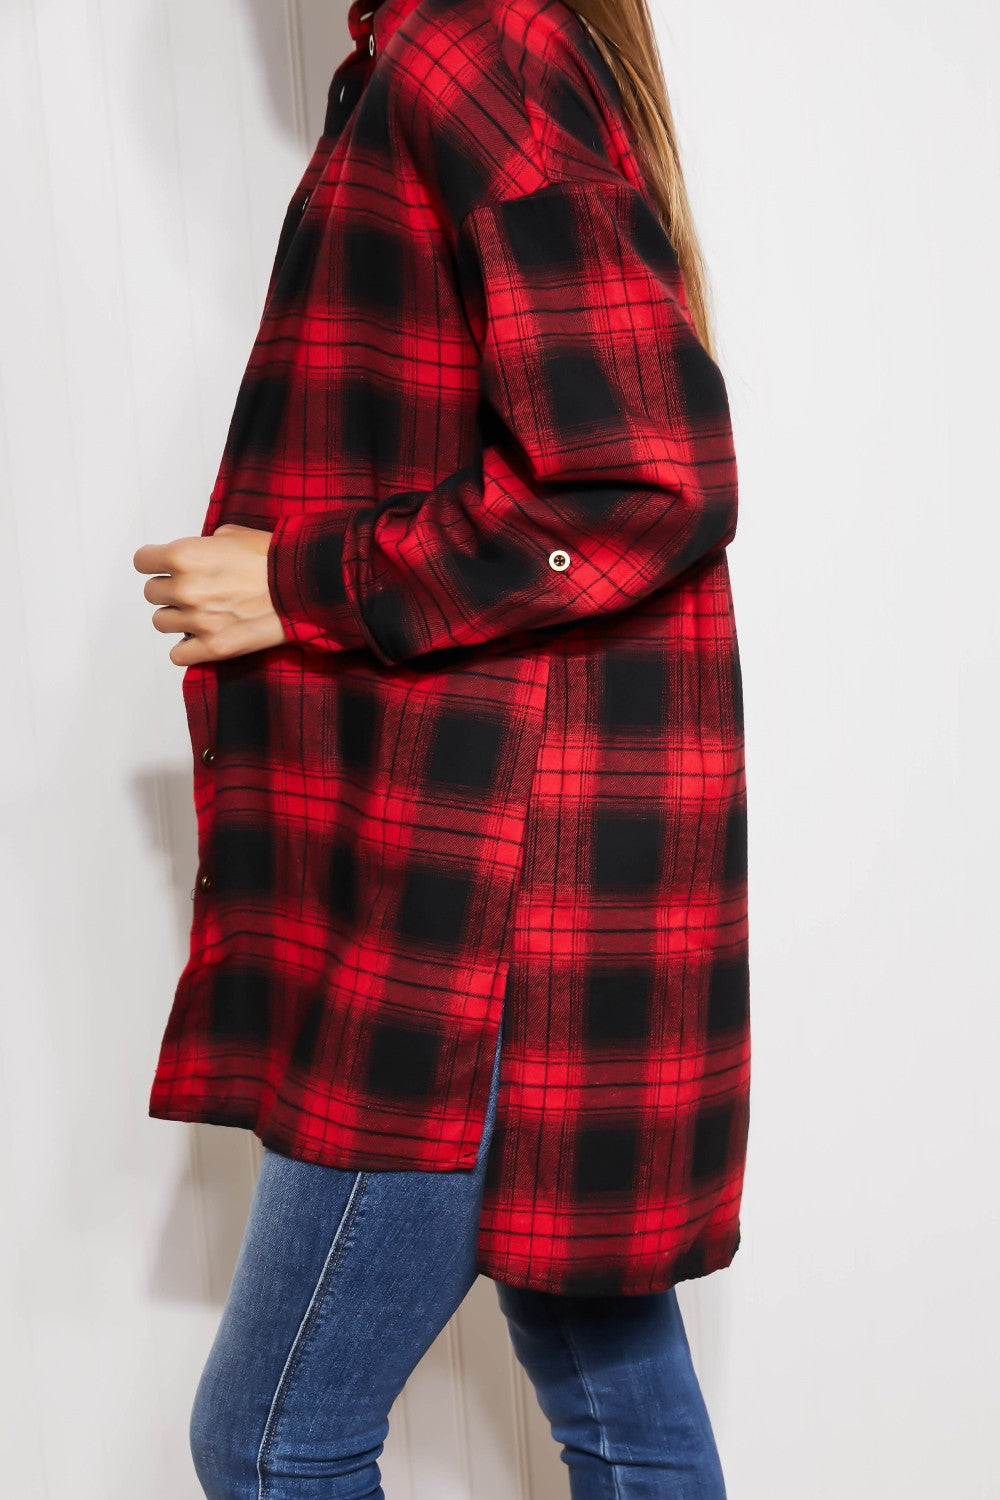 GeeGee Happy Harvest Plaid Button Up Tunic